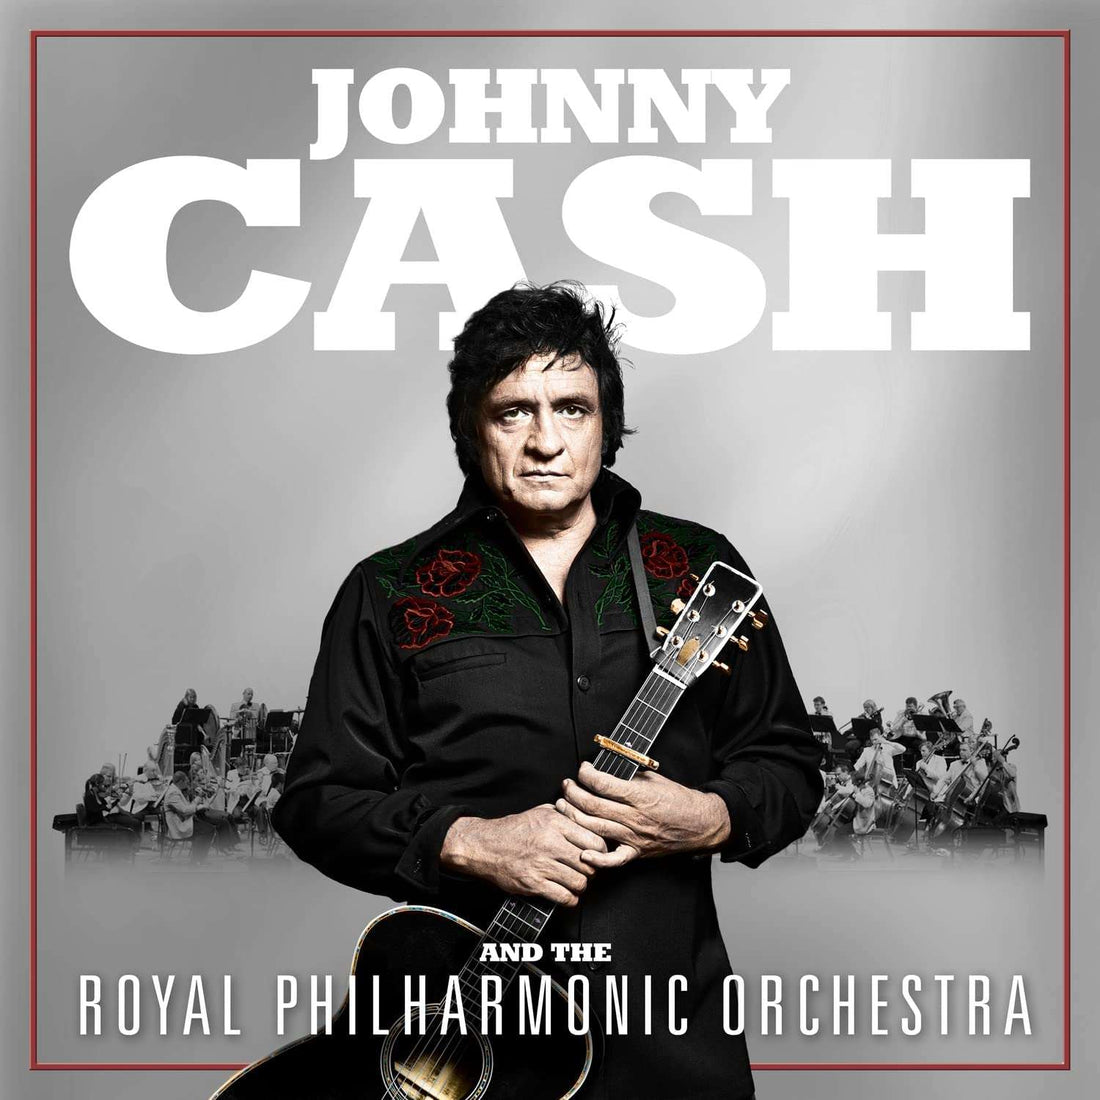 Johnny Cash And The Royal Philharmonic Orchestra | Johnny Cash - Vinyl.ae